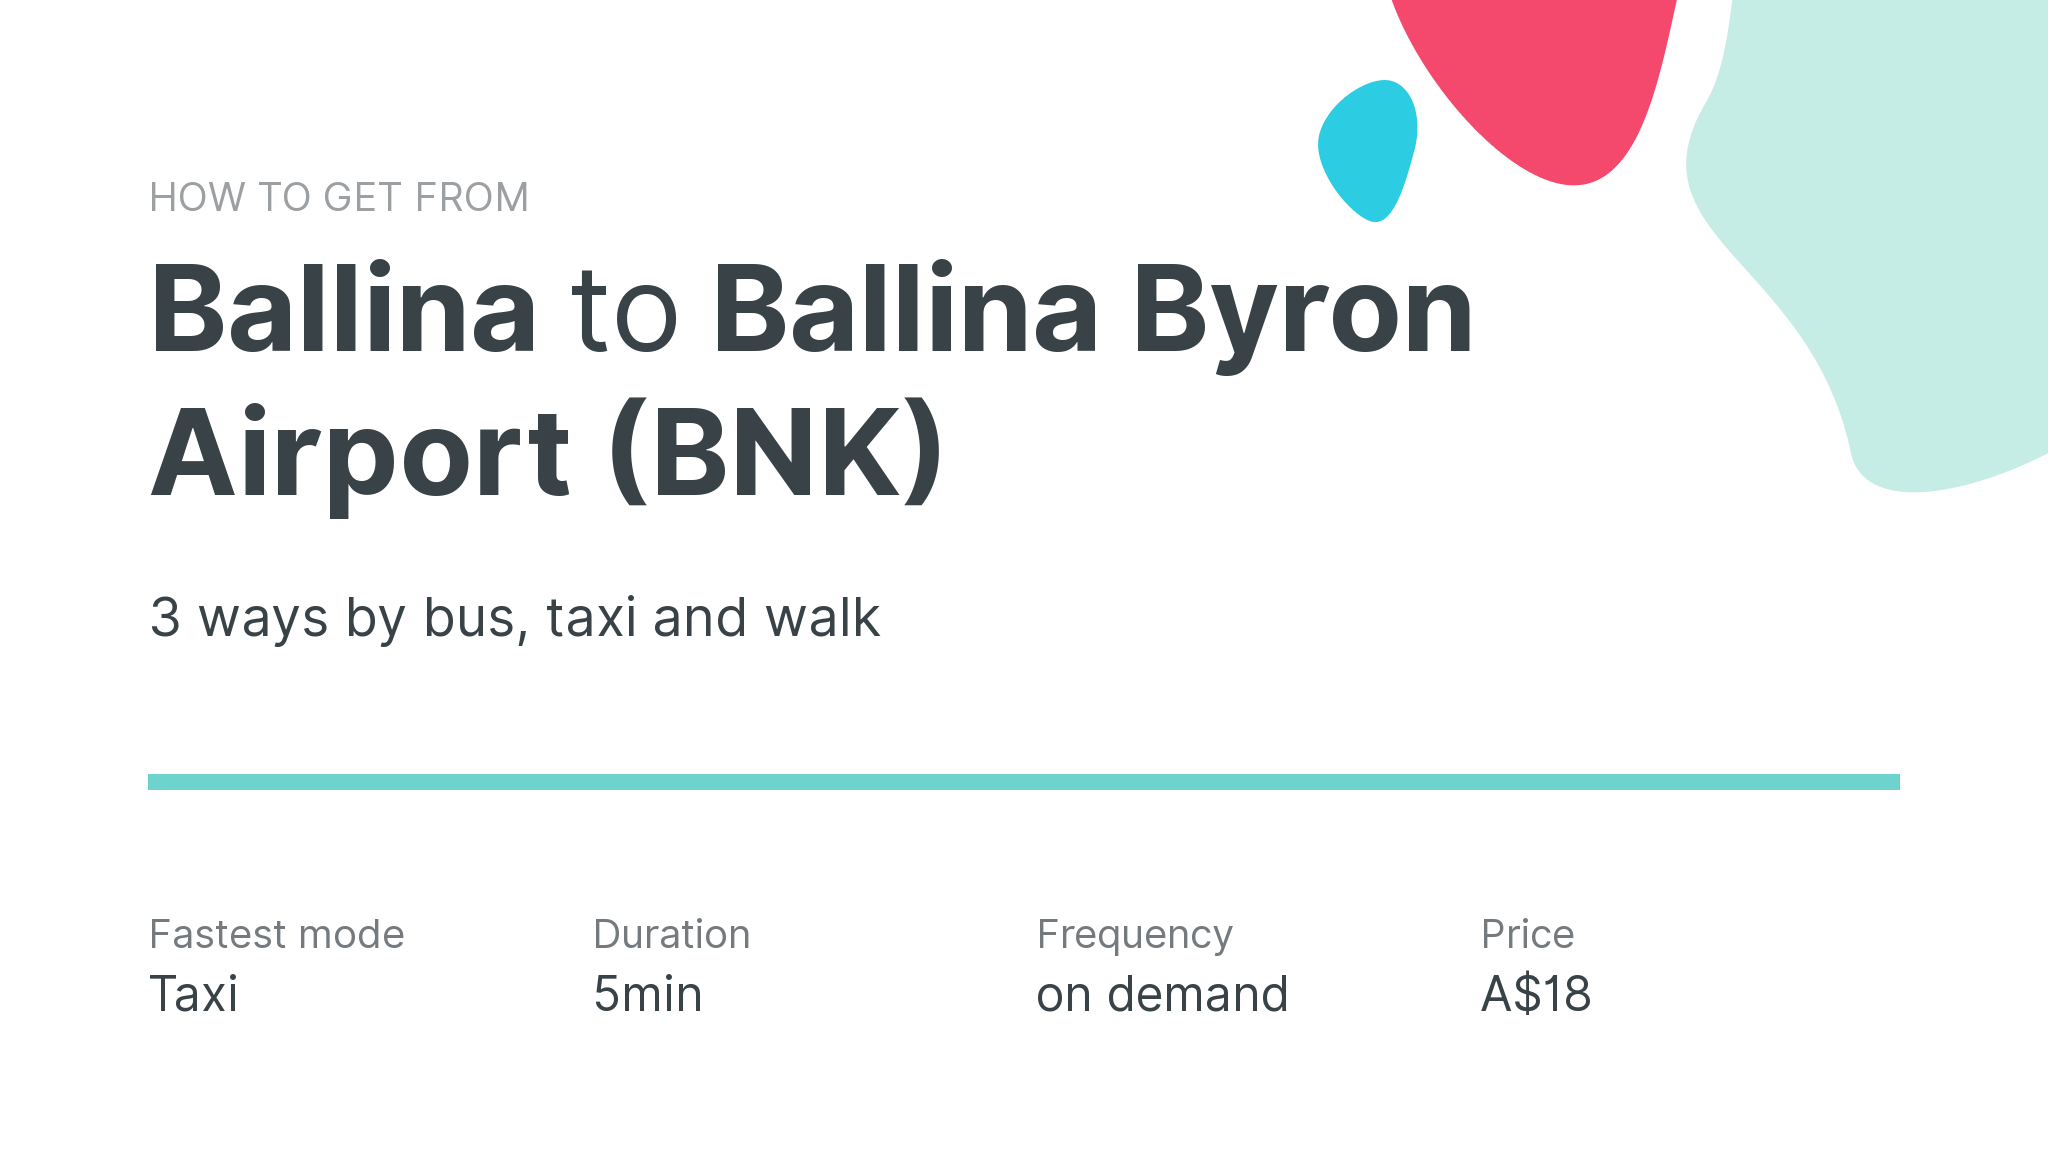 How do I get from Ballina to Ballina Byron Airport (BNK)